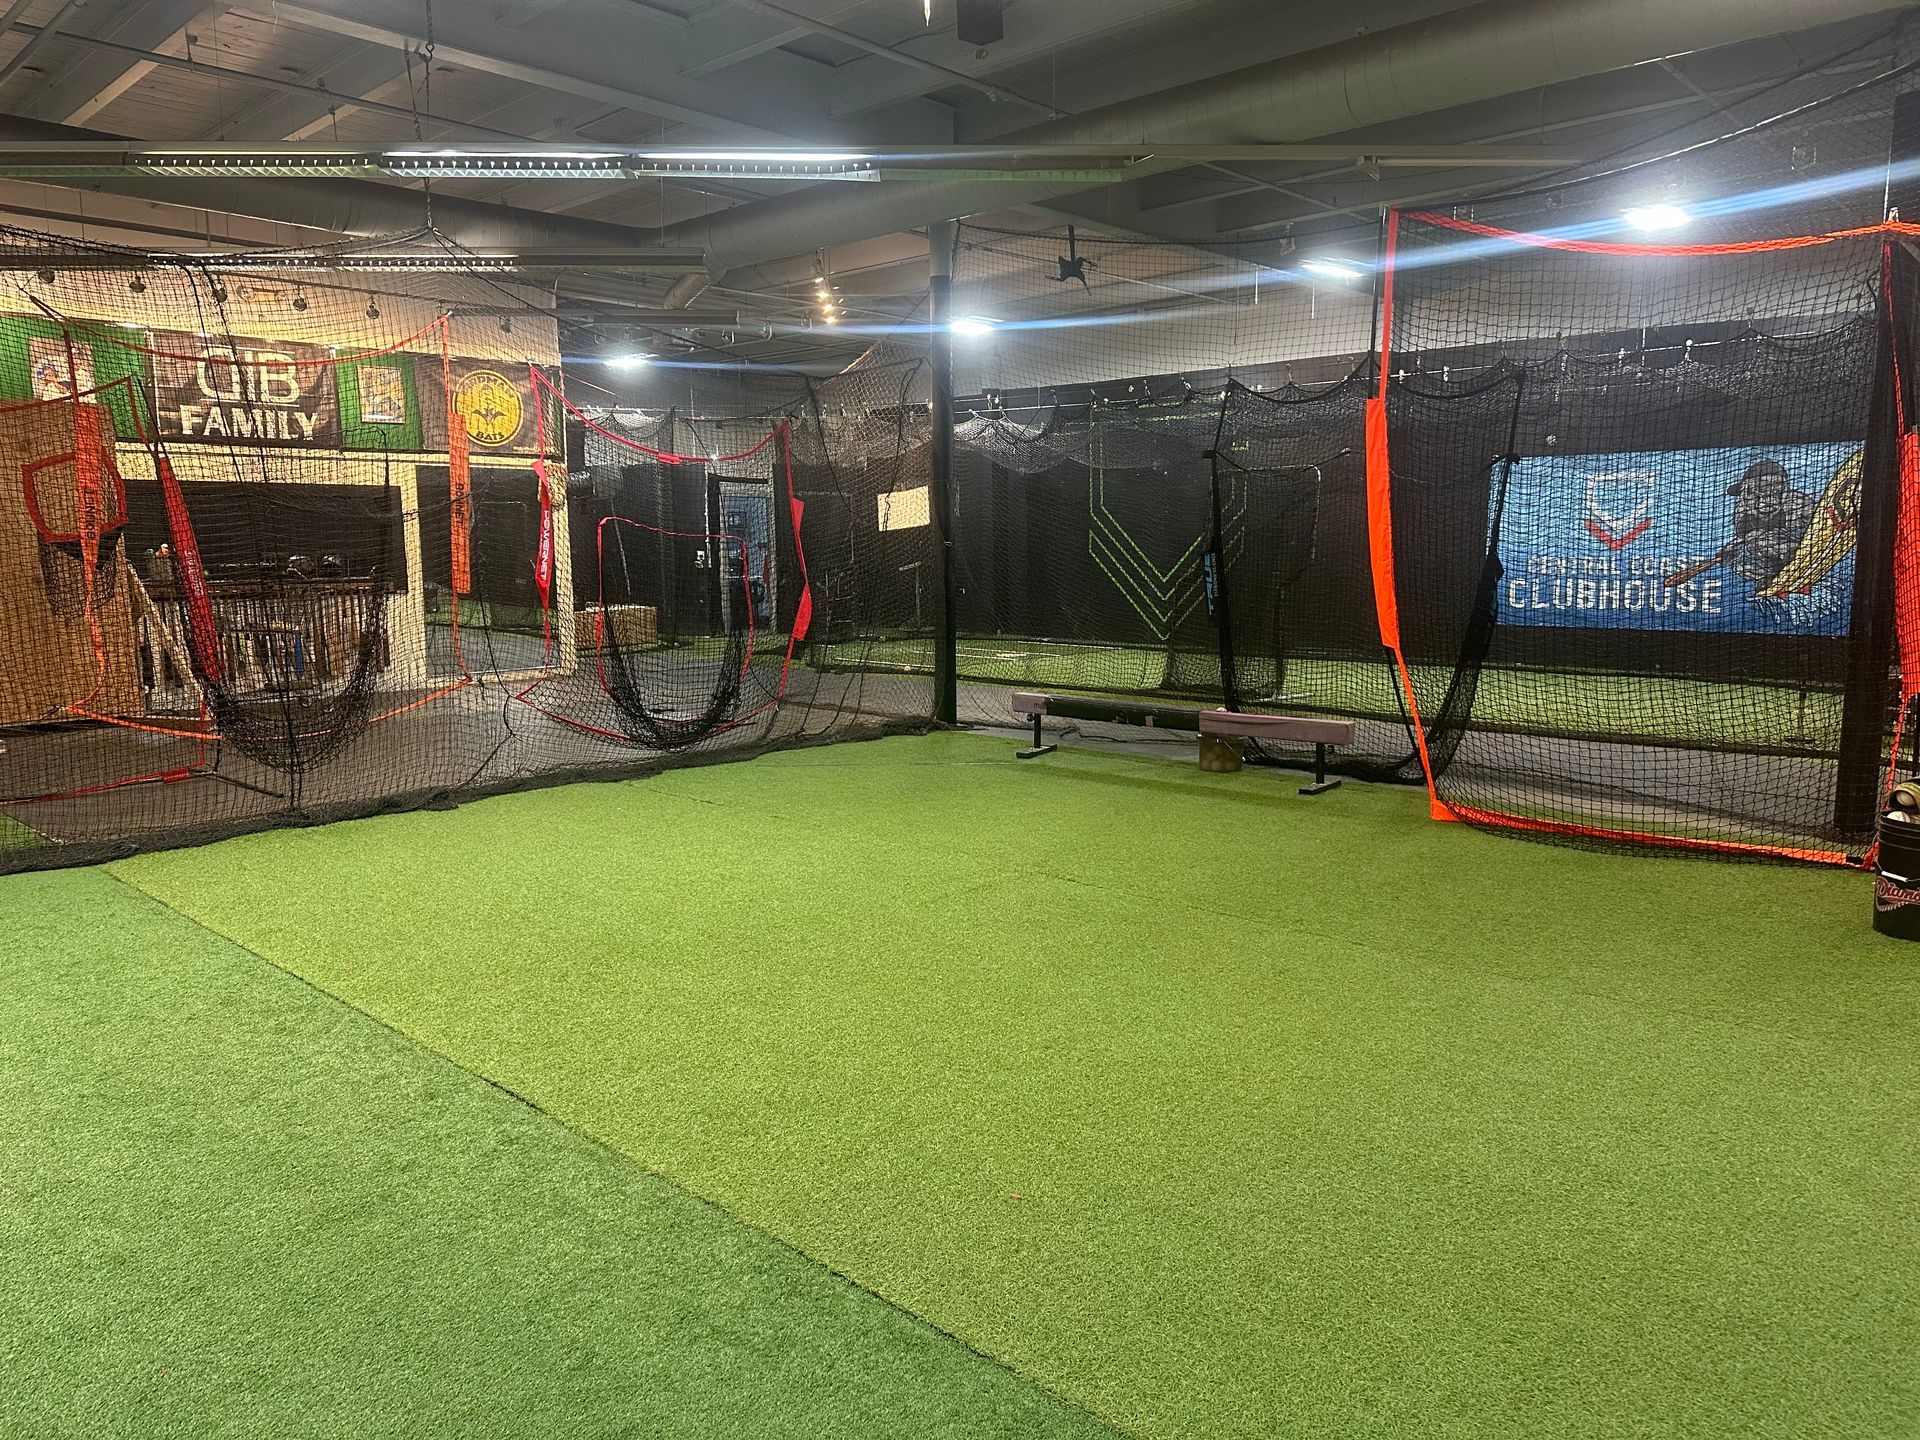 A large batting cage with a lot of nets.